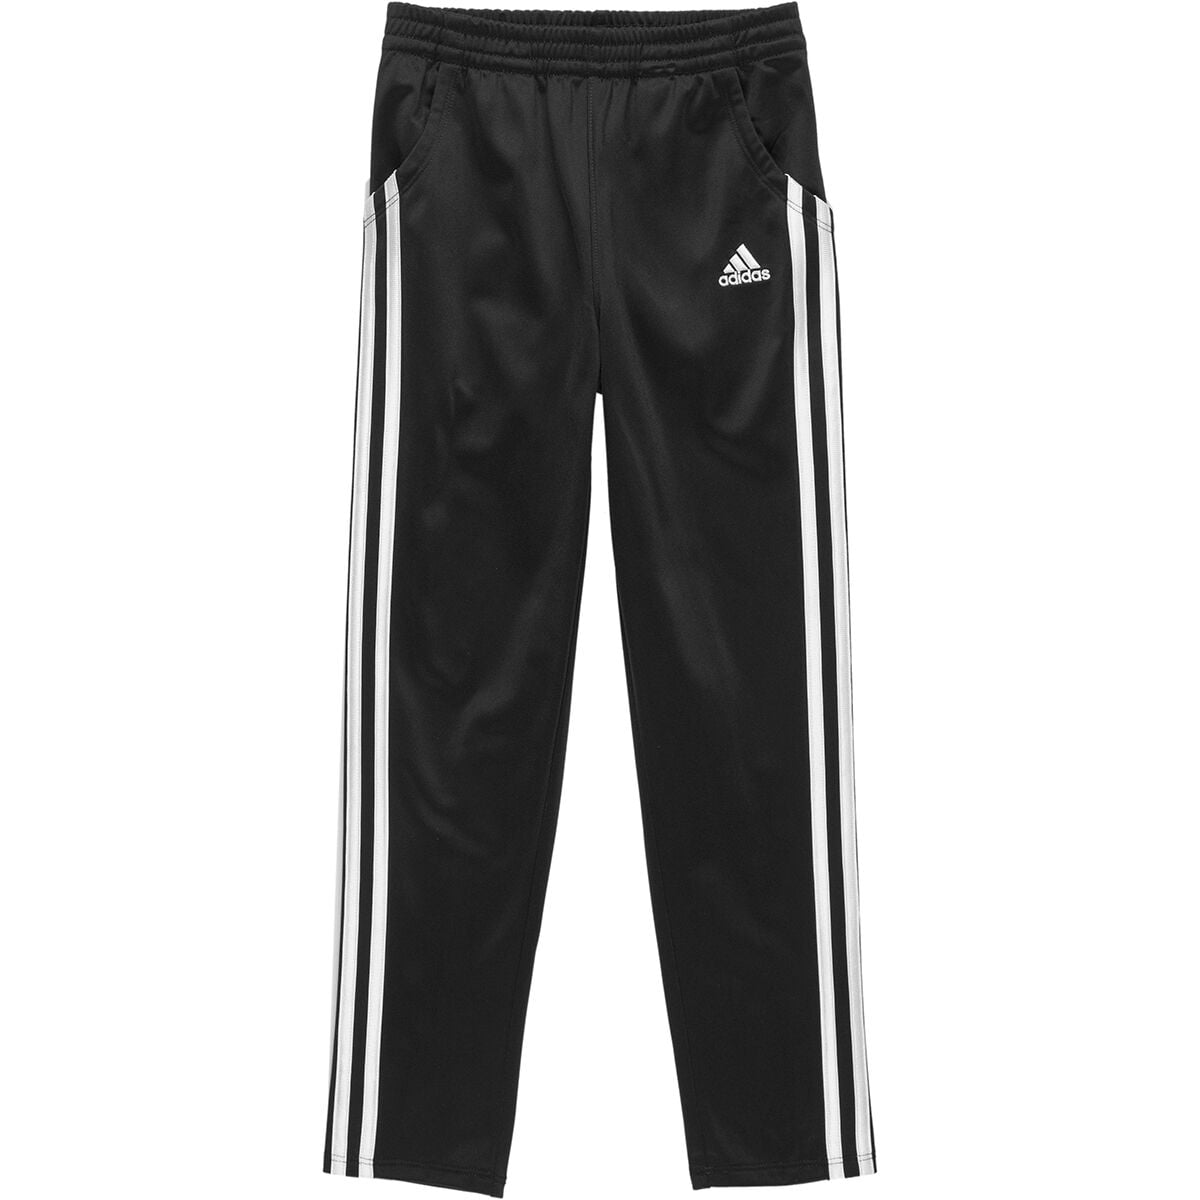 Replenish Warm Up Tricot Pant - Girls' by Adidas | US-Parks.com